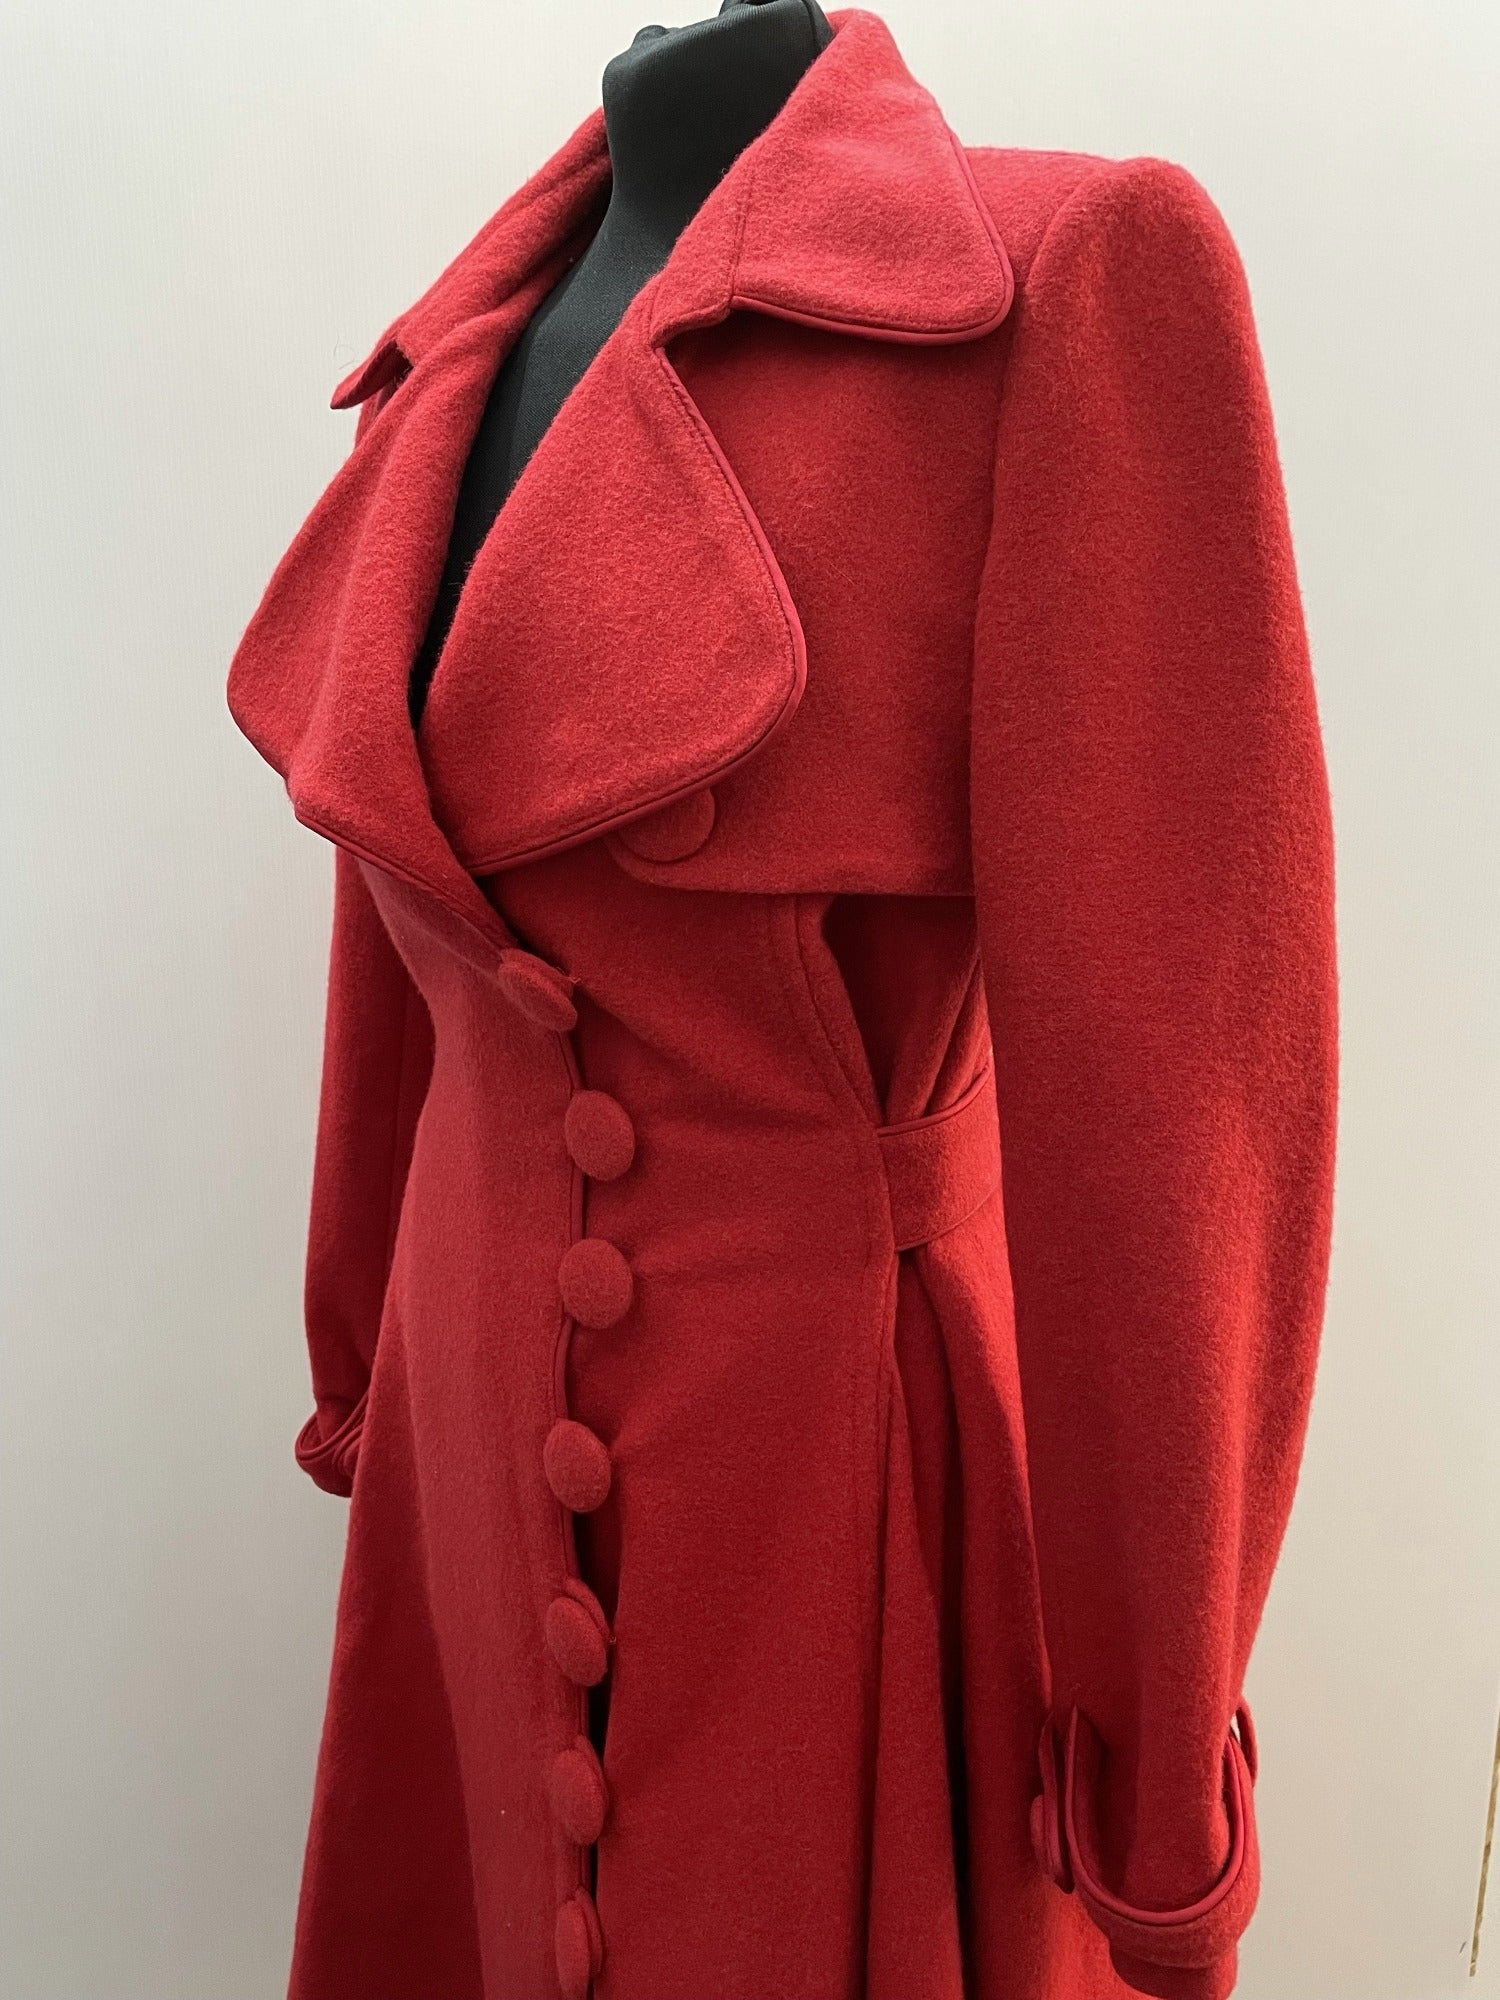 coat  wool coat  wool  vintage coat  vintage  retro  red  princess coat  princess  fitted coat  fit and flare  festive  christmas  8  70s  1970s